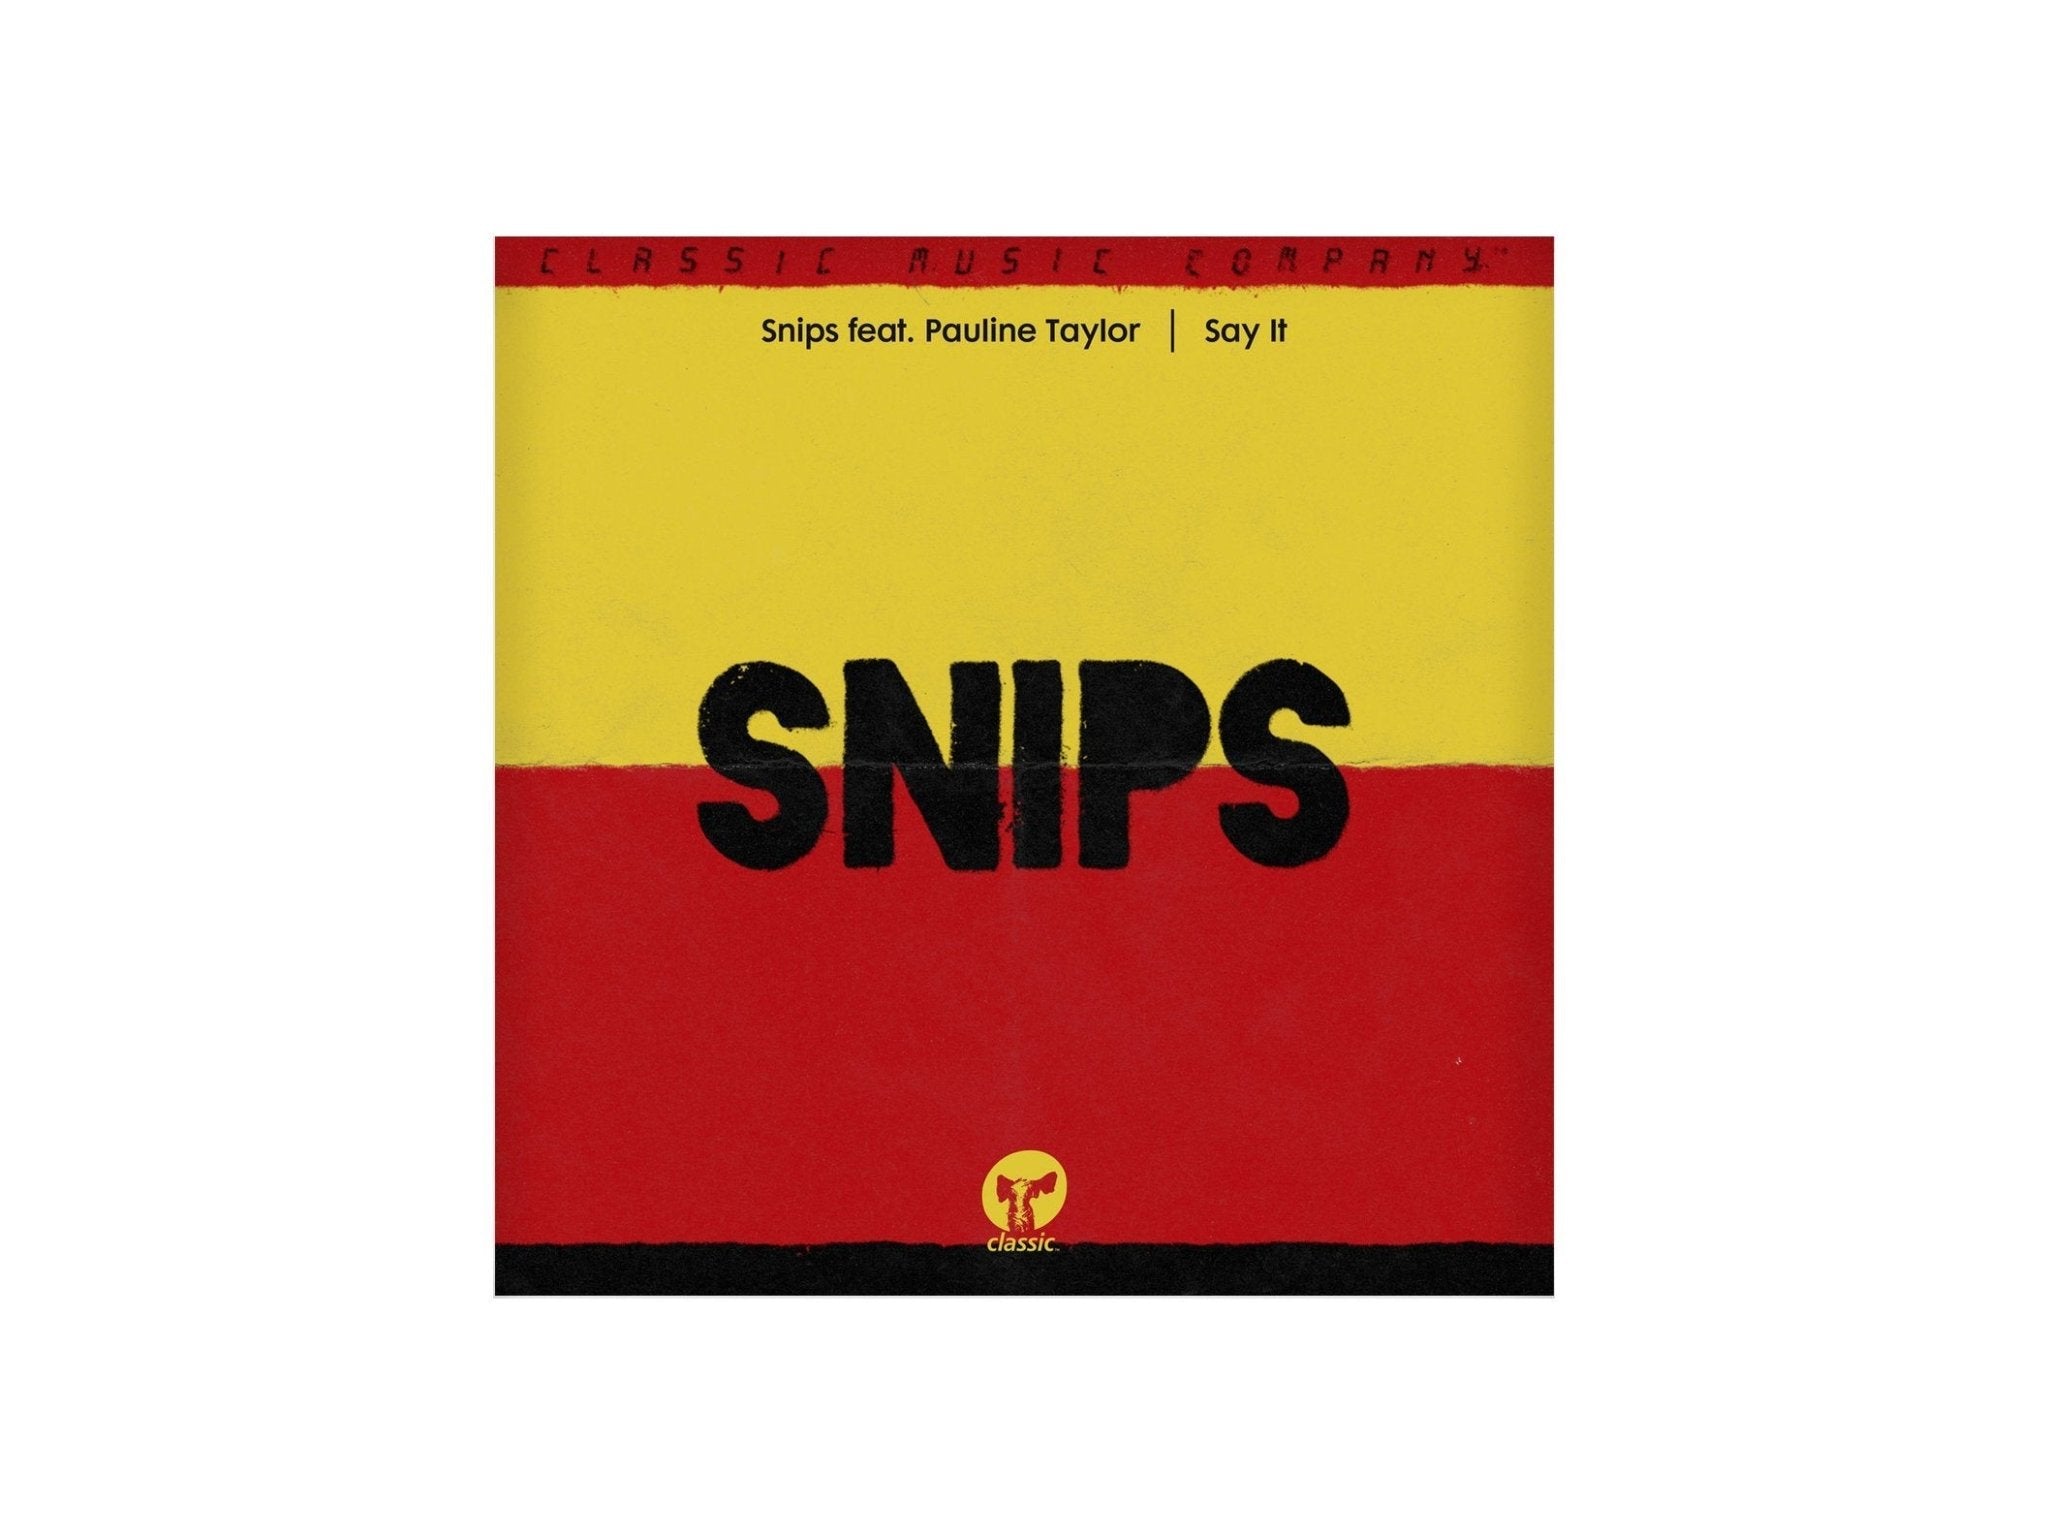 Snips Say It - Featuring Pauline Taylor 12"